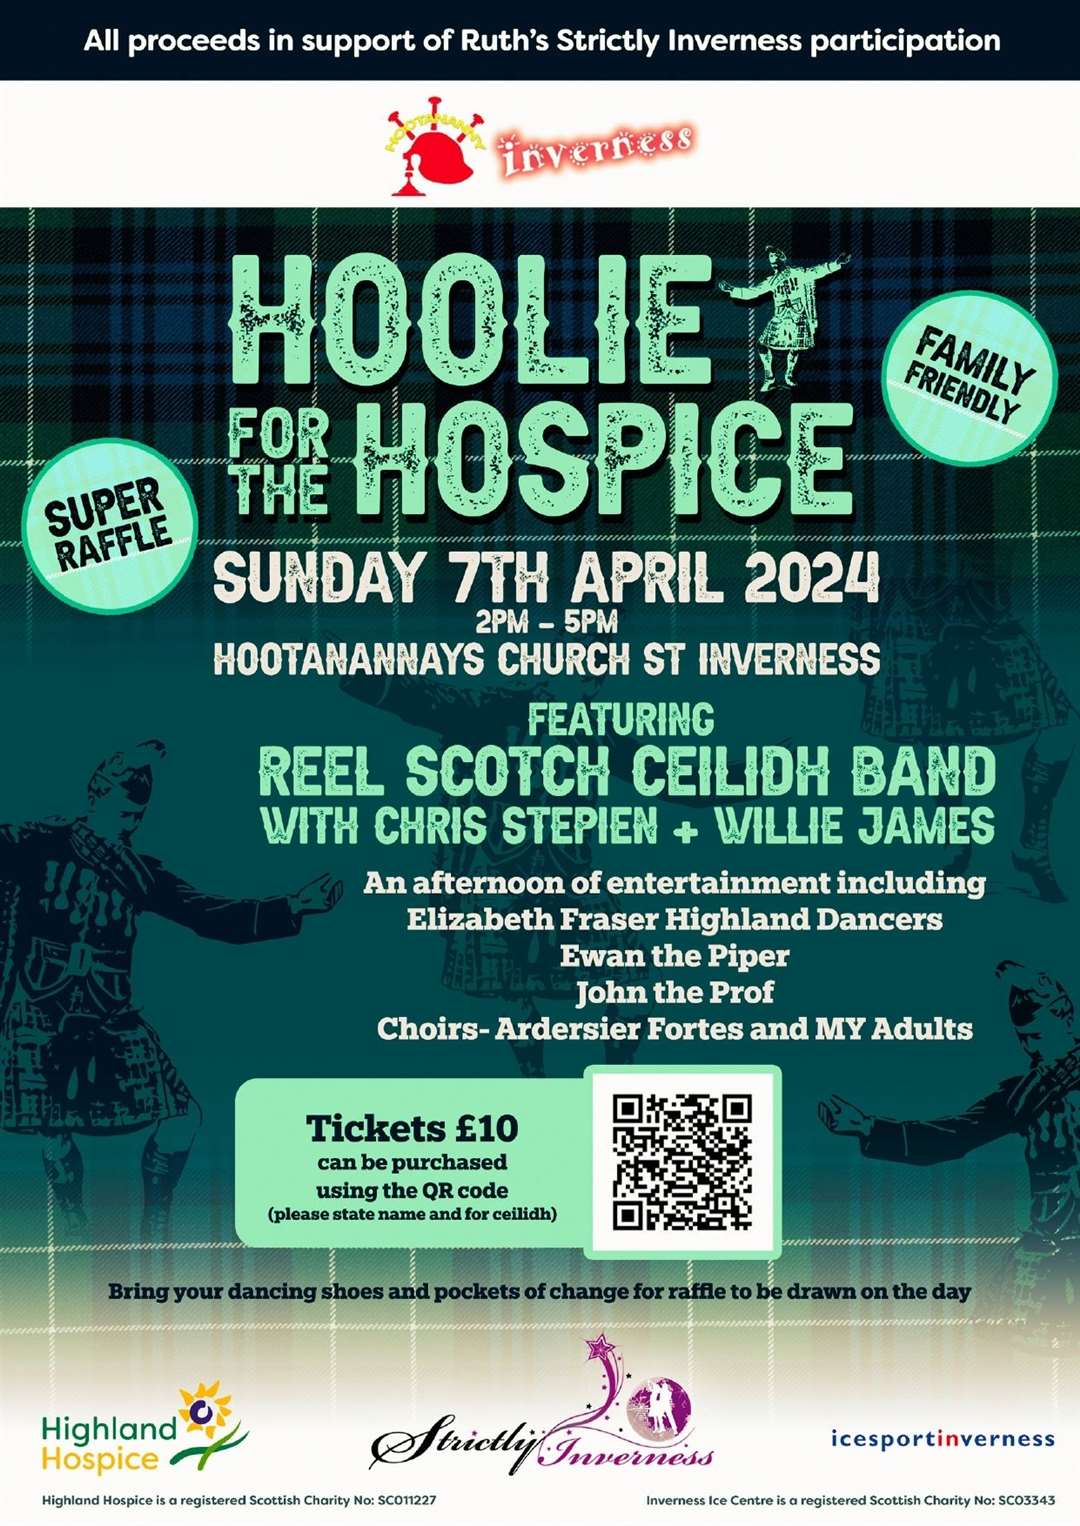 Ruth has planned a ceilidh for April 7.